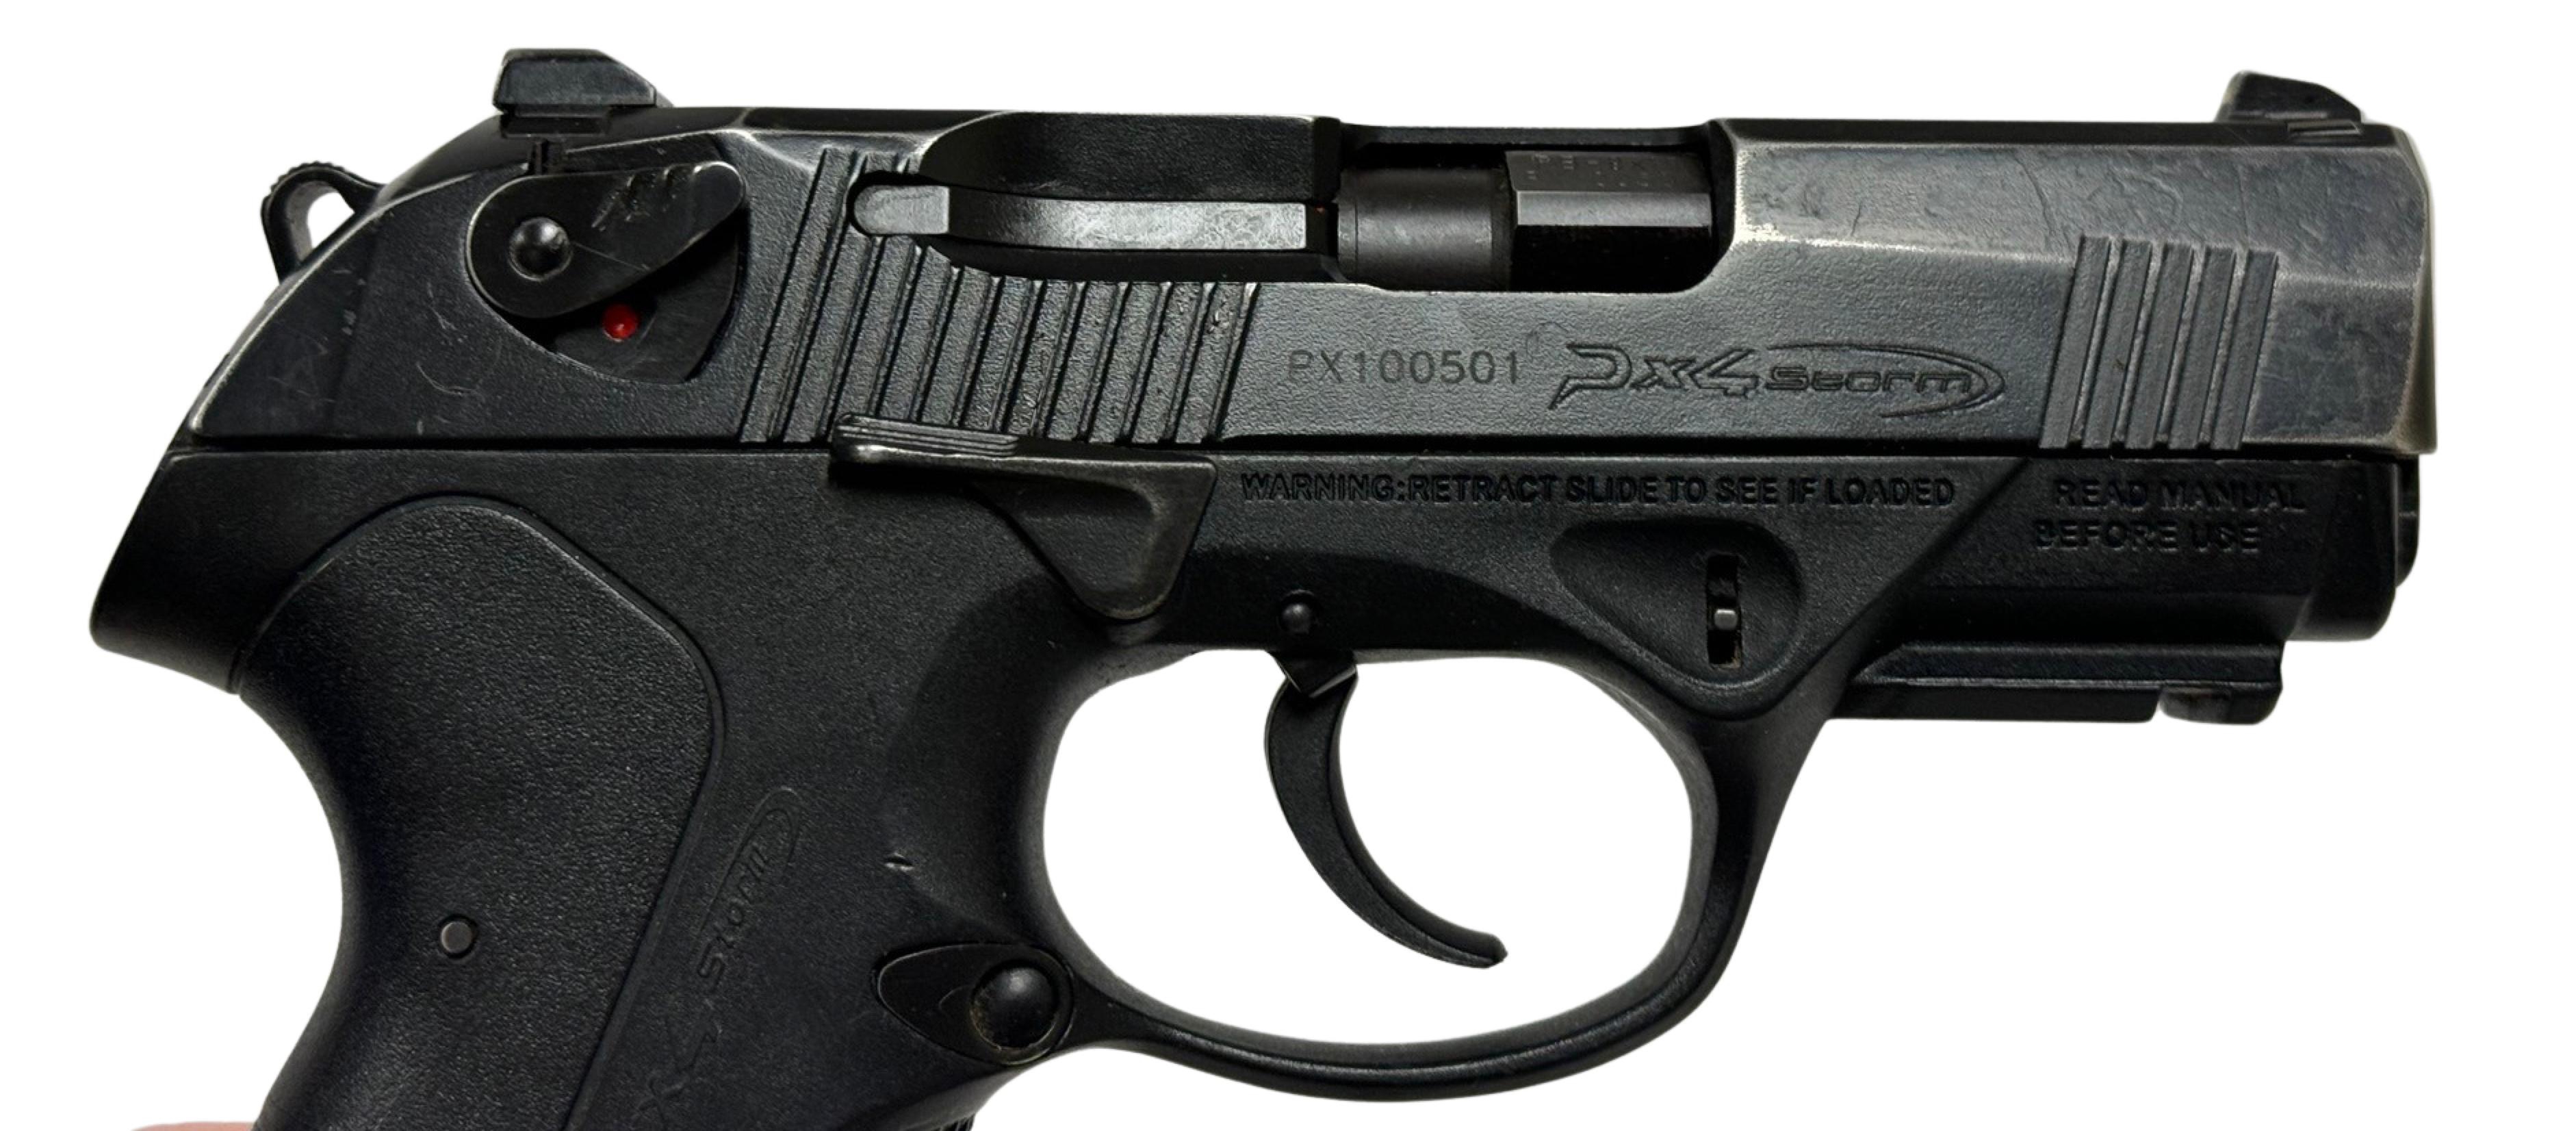 Beretta PX4 Storm 9mm Semi-Automatic Pistol with Holster and (2) Magazines